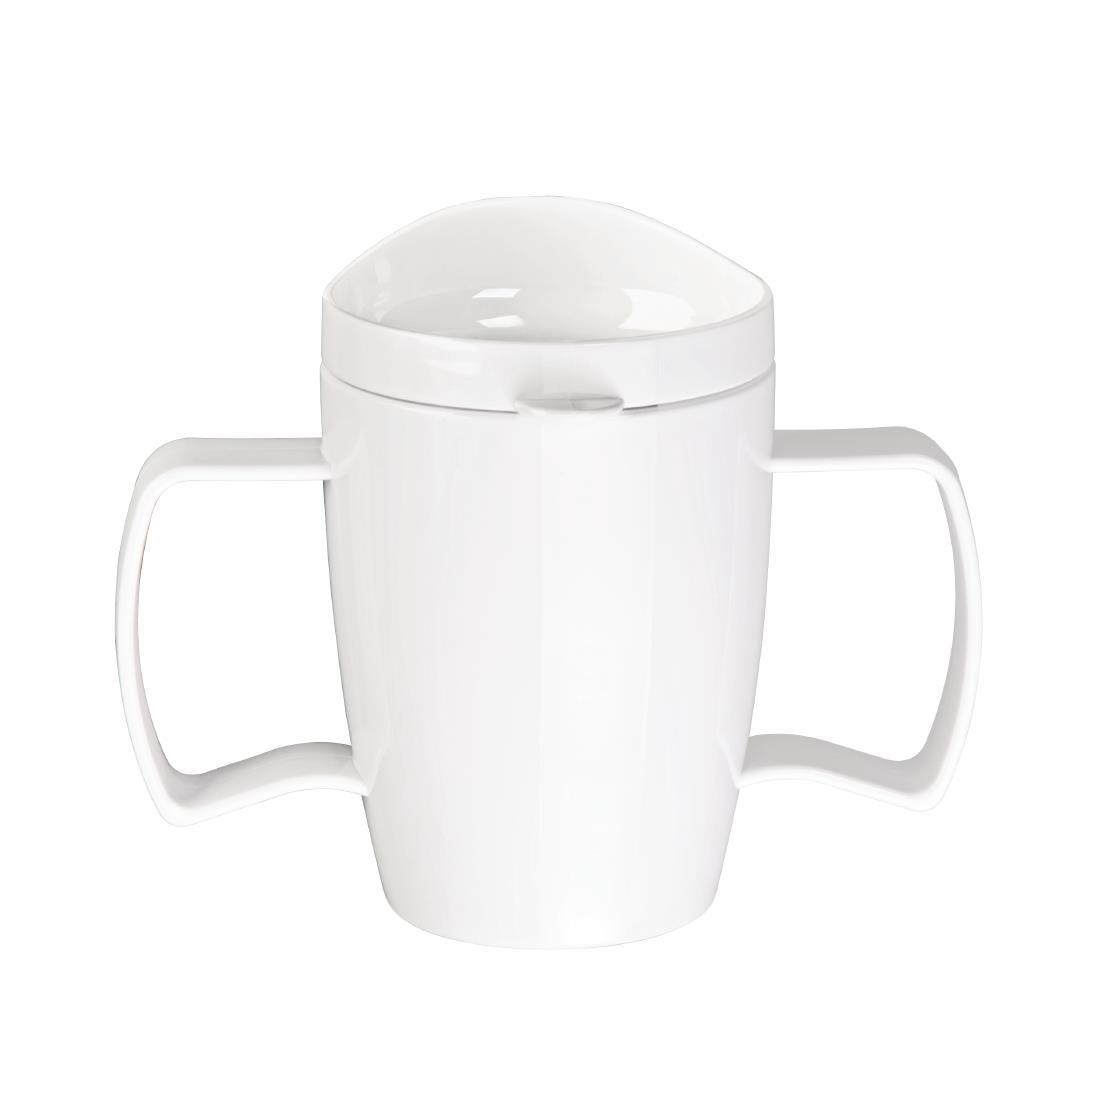 Olympia Kristallon Heritage Double-Handled Mugs with Lids White 300ml (Pack of 4) - DW715  - 2